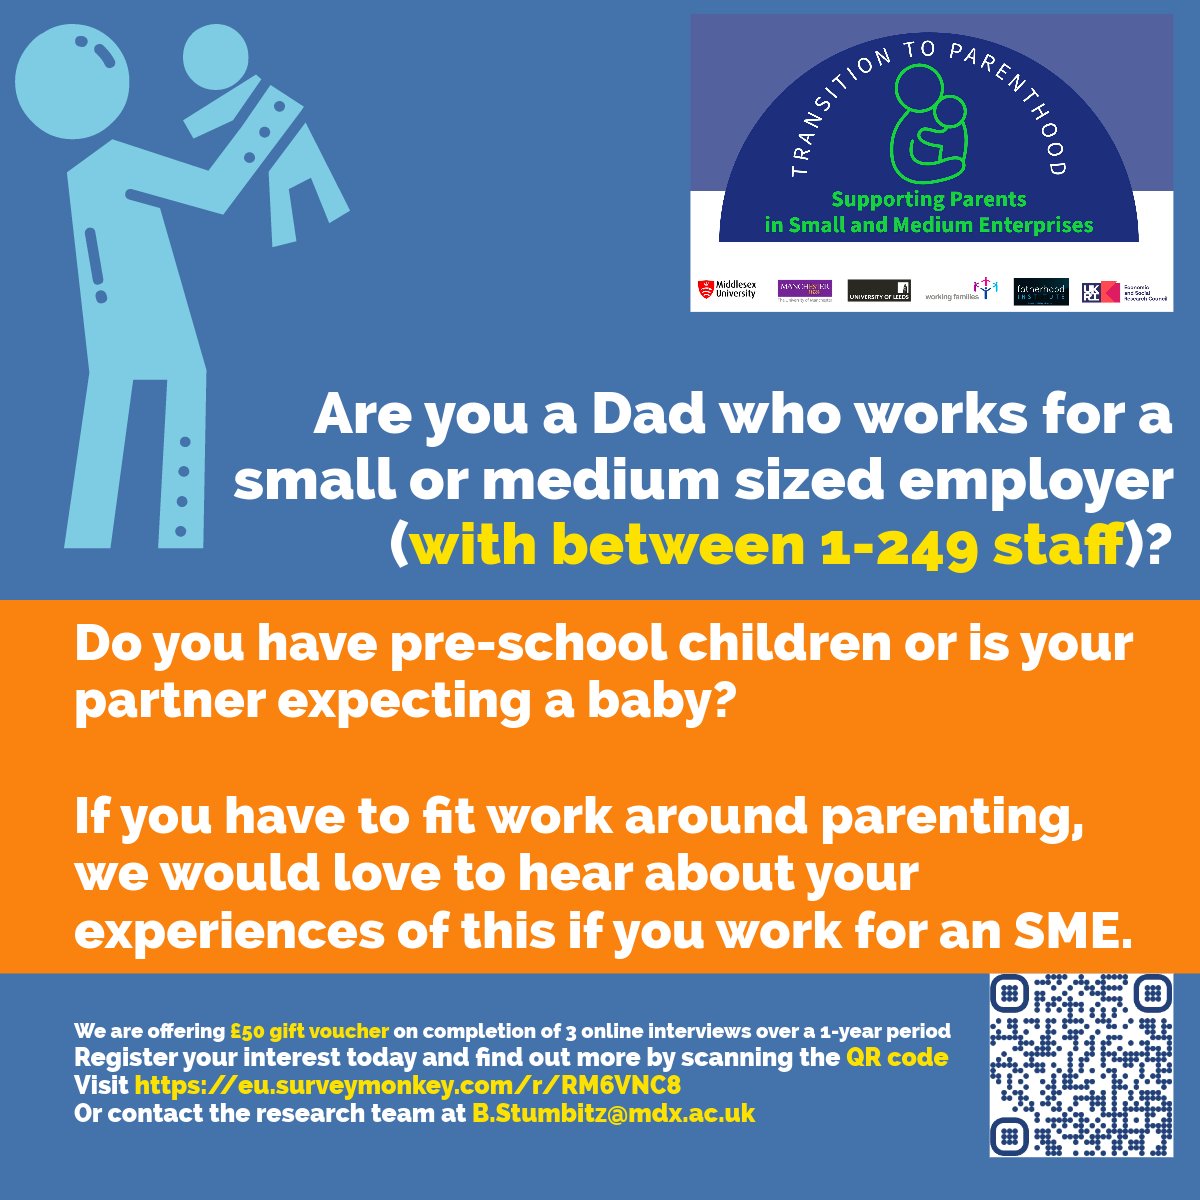 Calling all #dads #fathers working for an #sme. Do you juggle #childcare of #preschool #children or a #newparent or #expectingparent? Recently requested #paternityleave #sharedparentalleave #adoptionleave or #flexibleworking to fit parenting around work? eu.surveymonkey.com/r/RM6VNC8